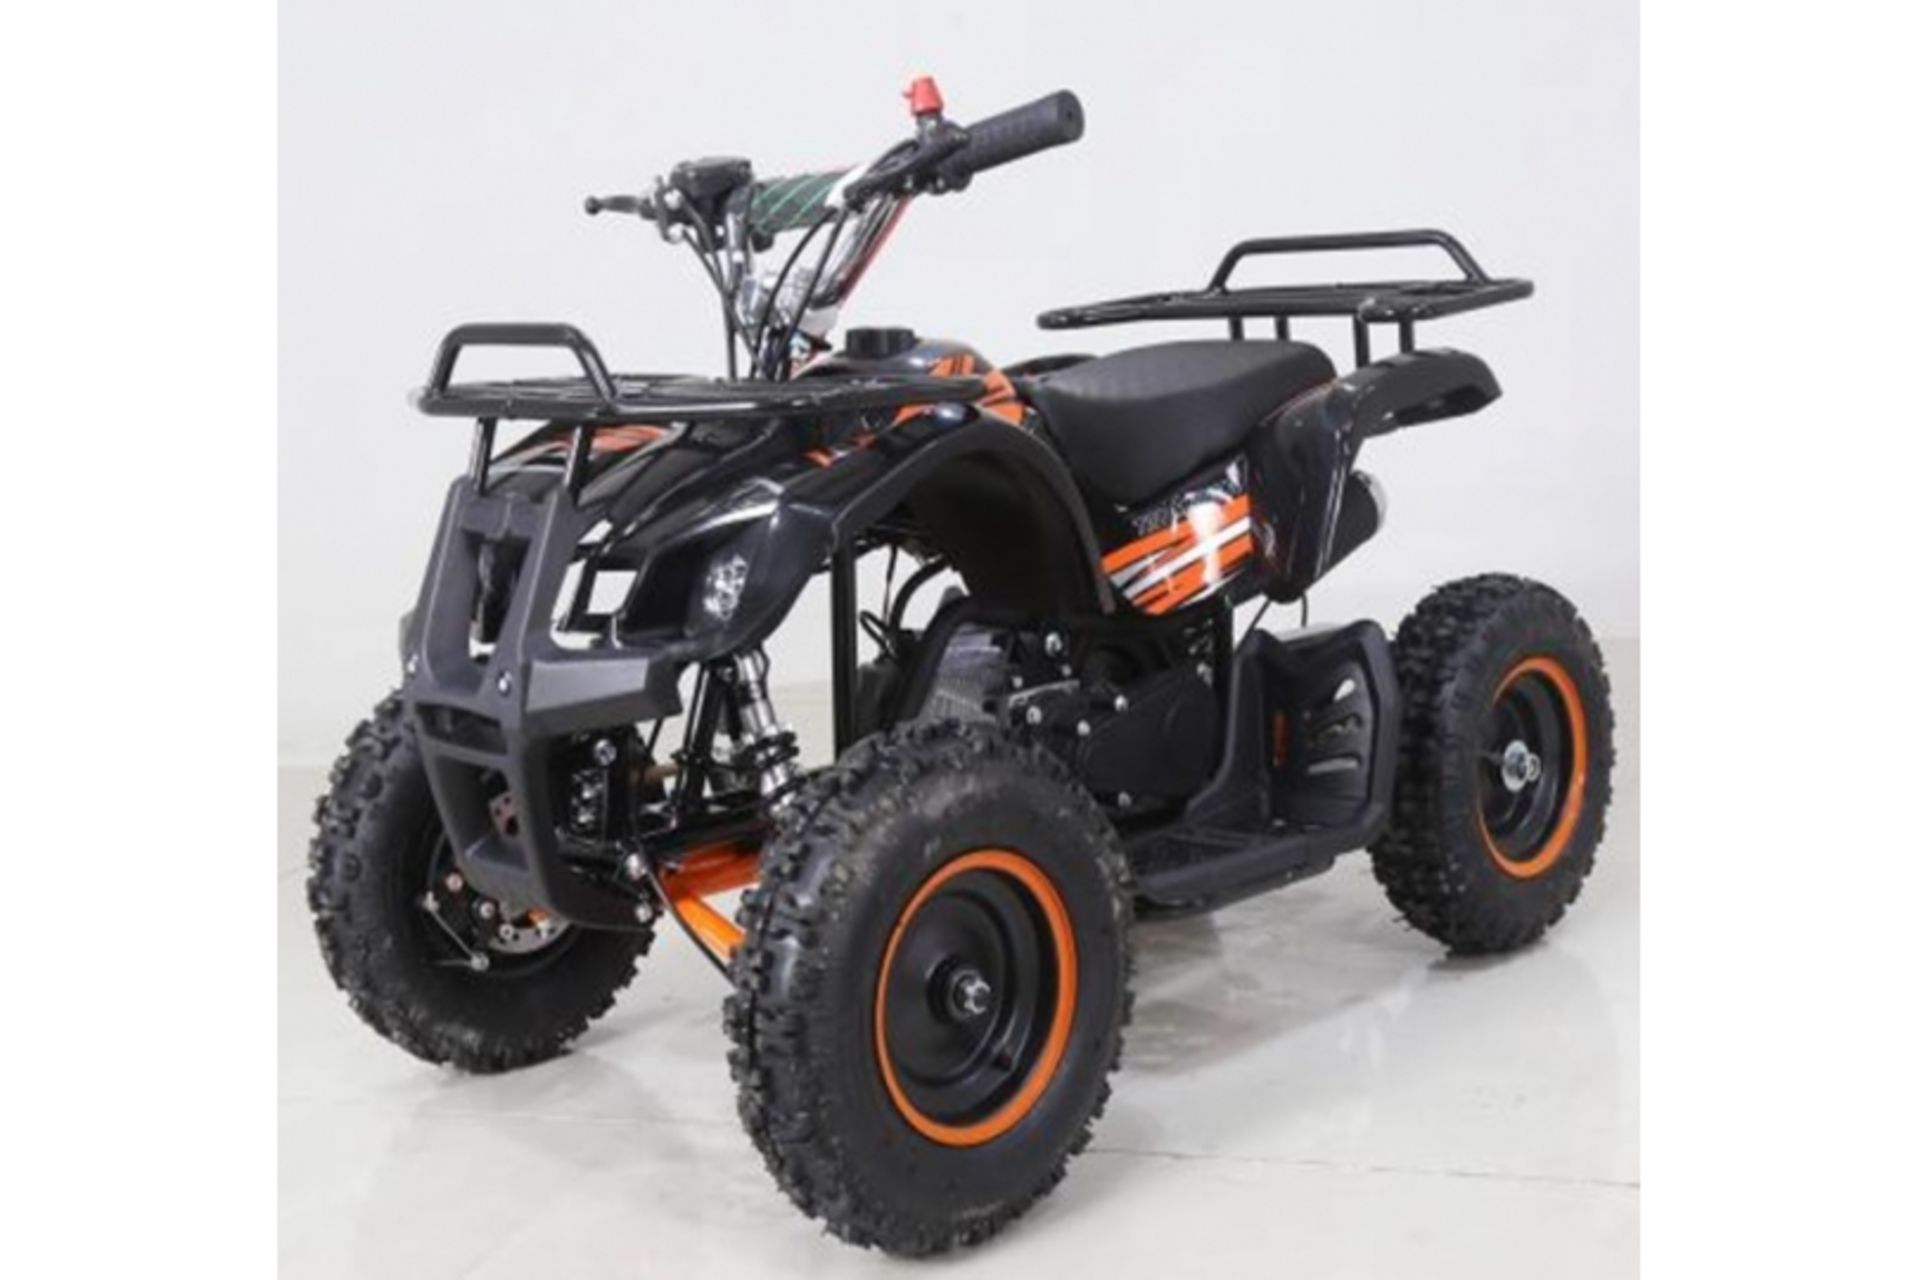 V Brand New 50cc Mini Quad Bike FRM - Colours May Vary - Front & Rear Frames